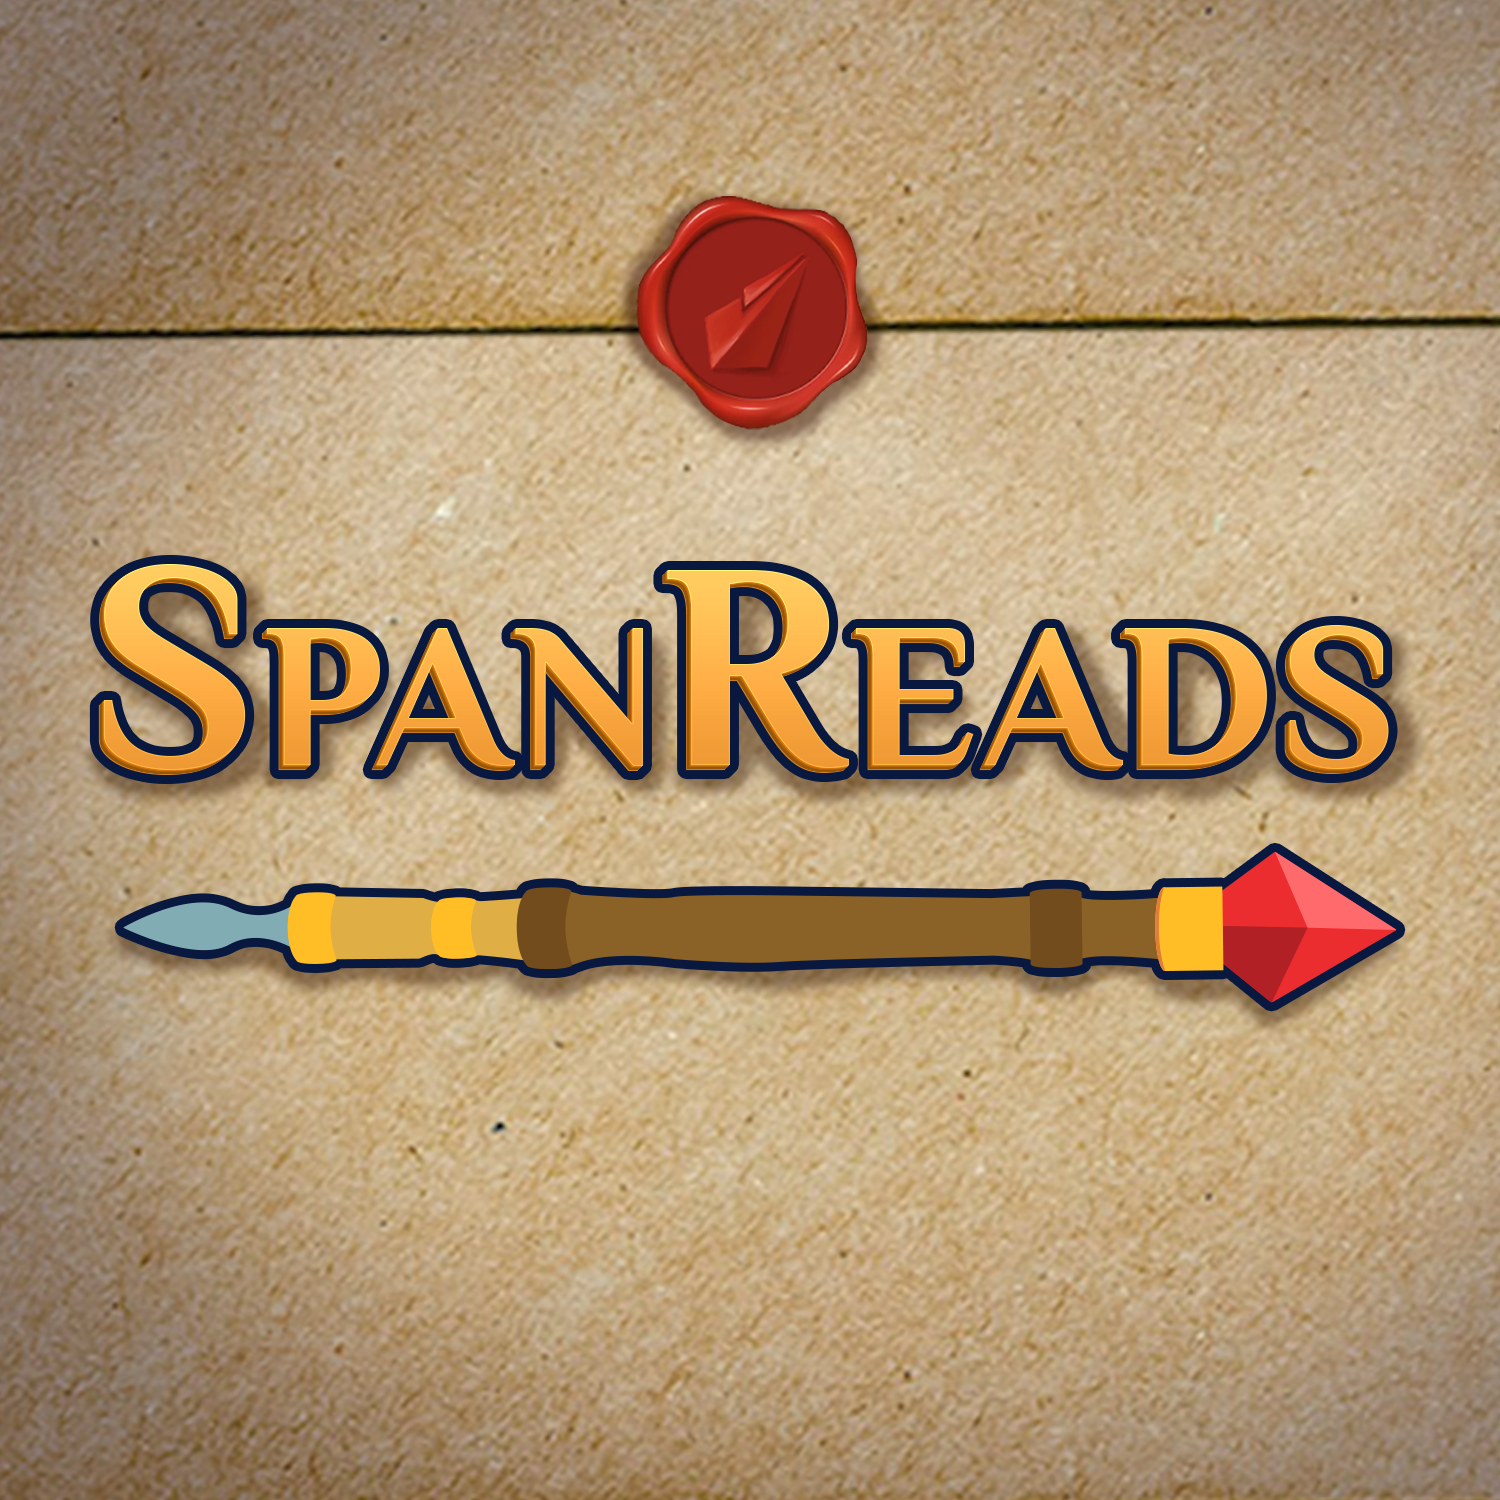 More information about "SpanReads: The Final Empire - Recap & Reactions"